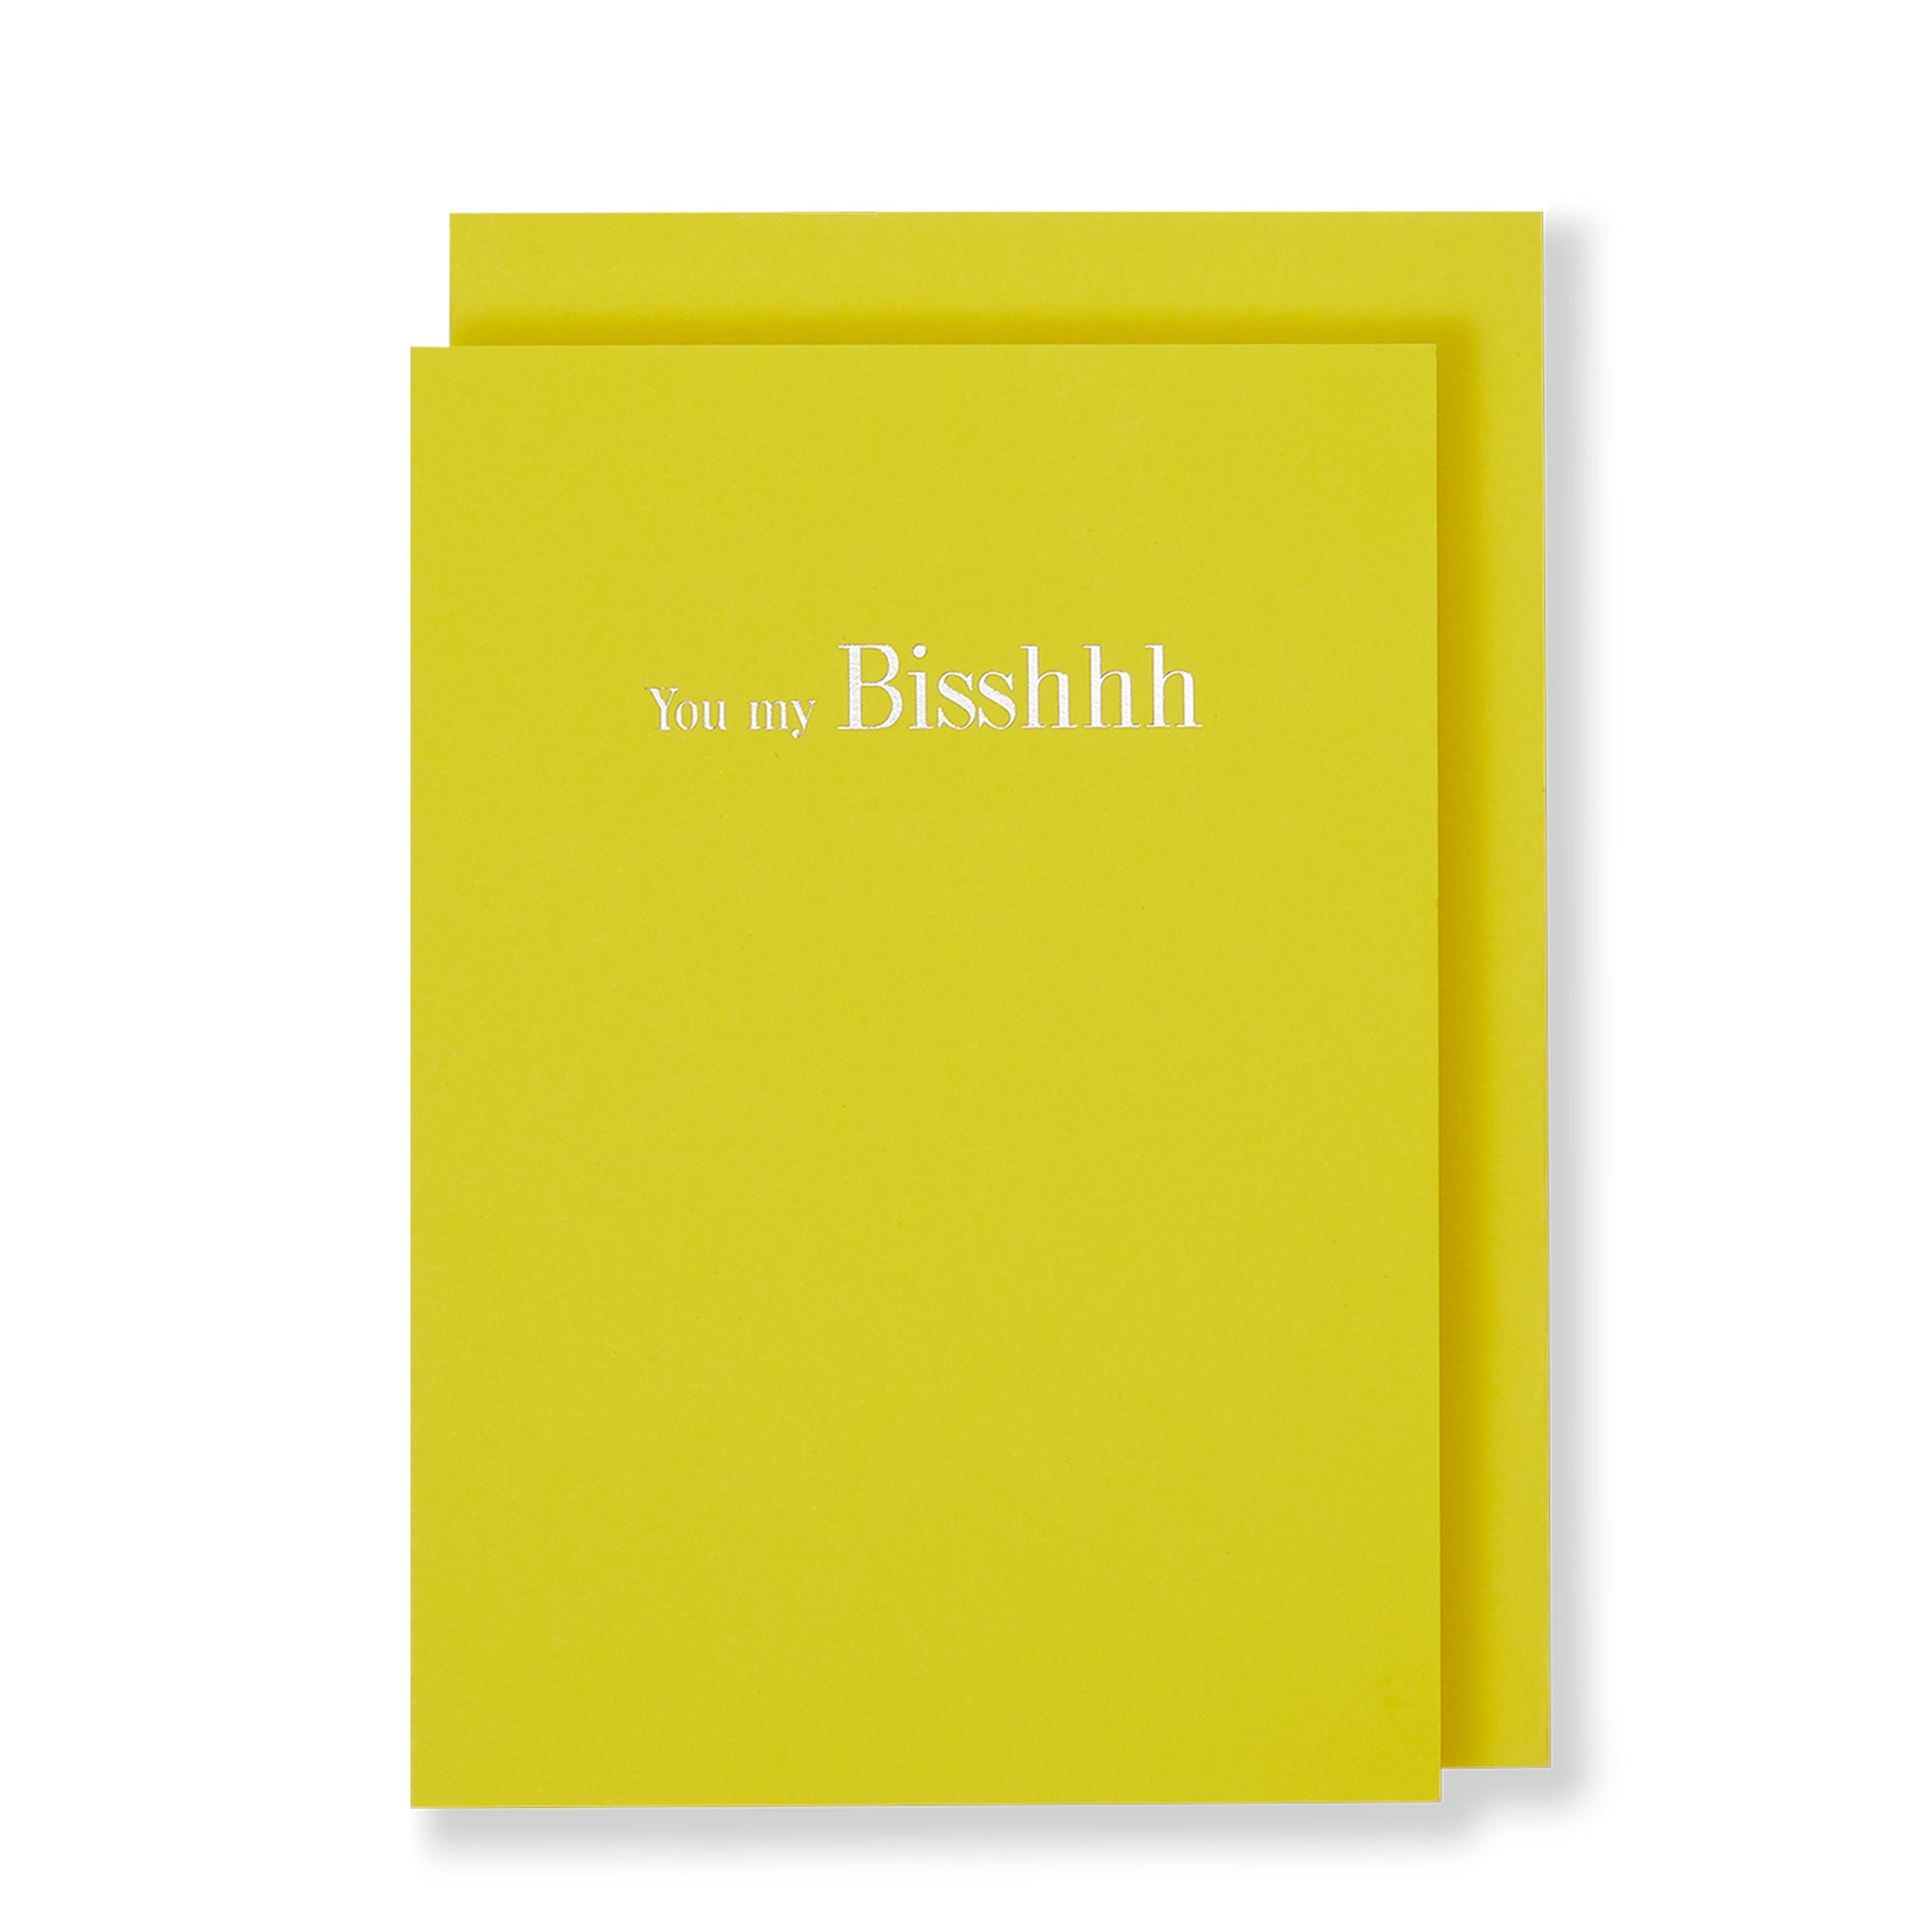 You My Bisshhh Greeting Card in Yellow, Front